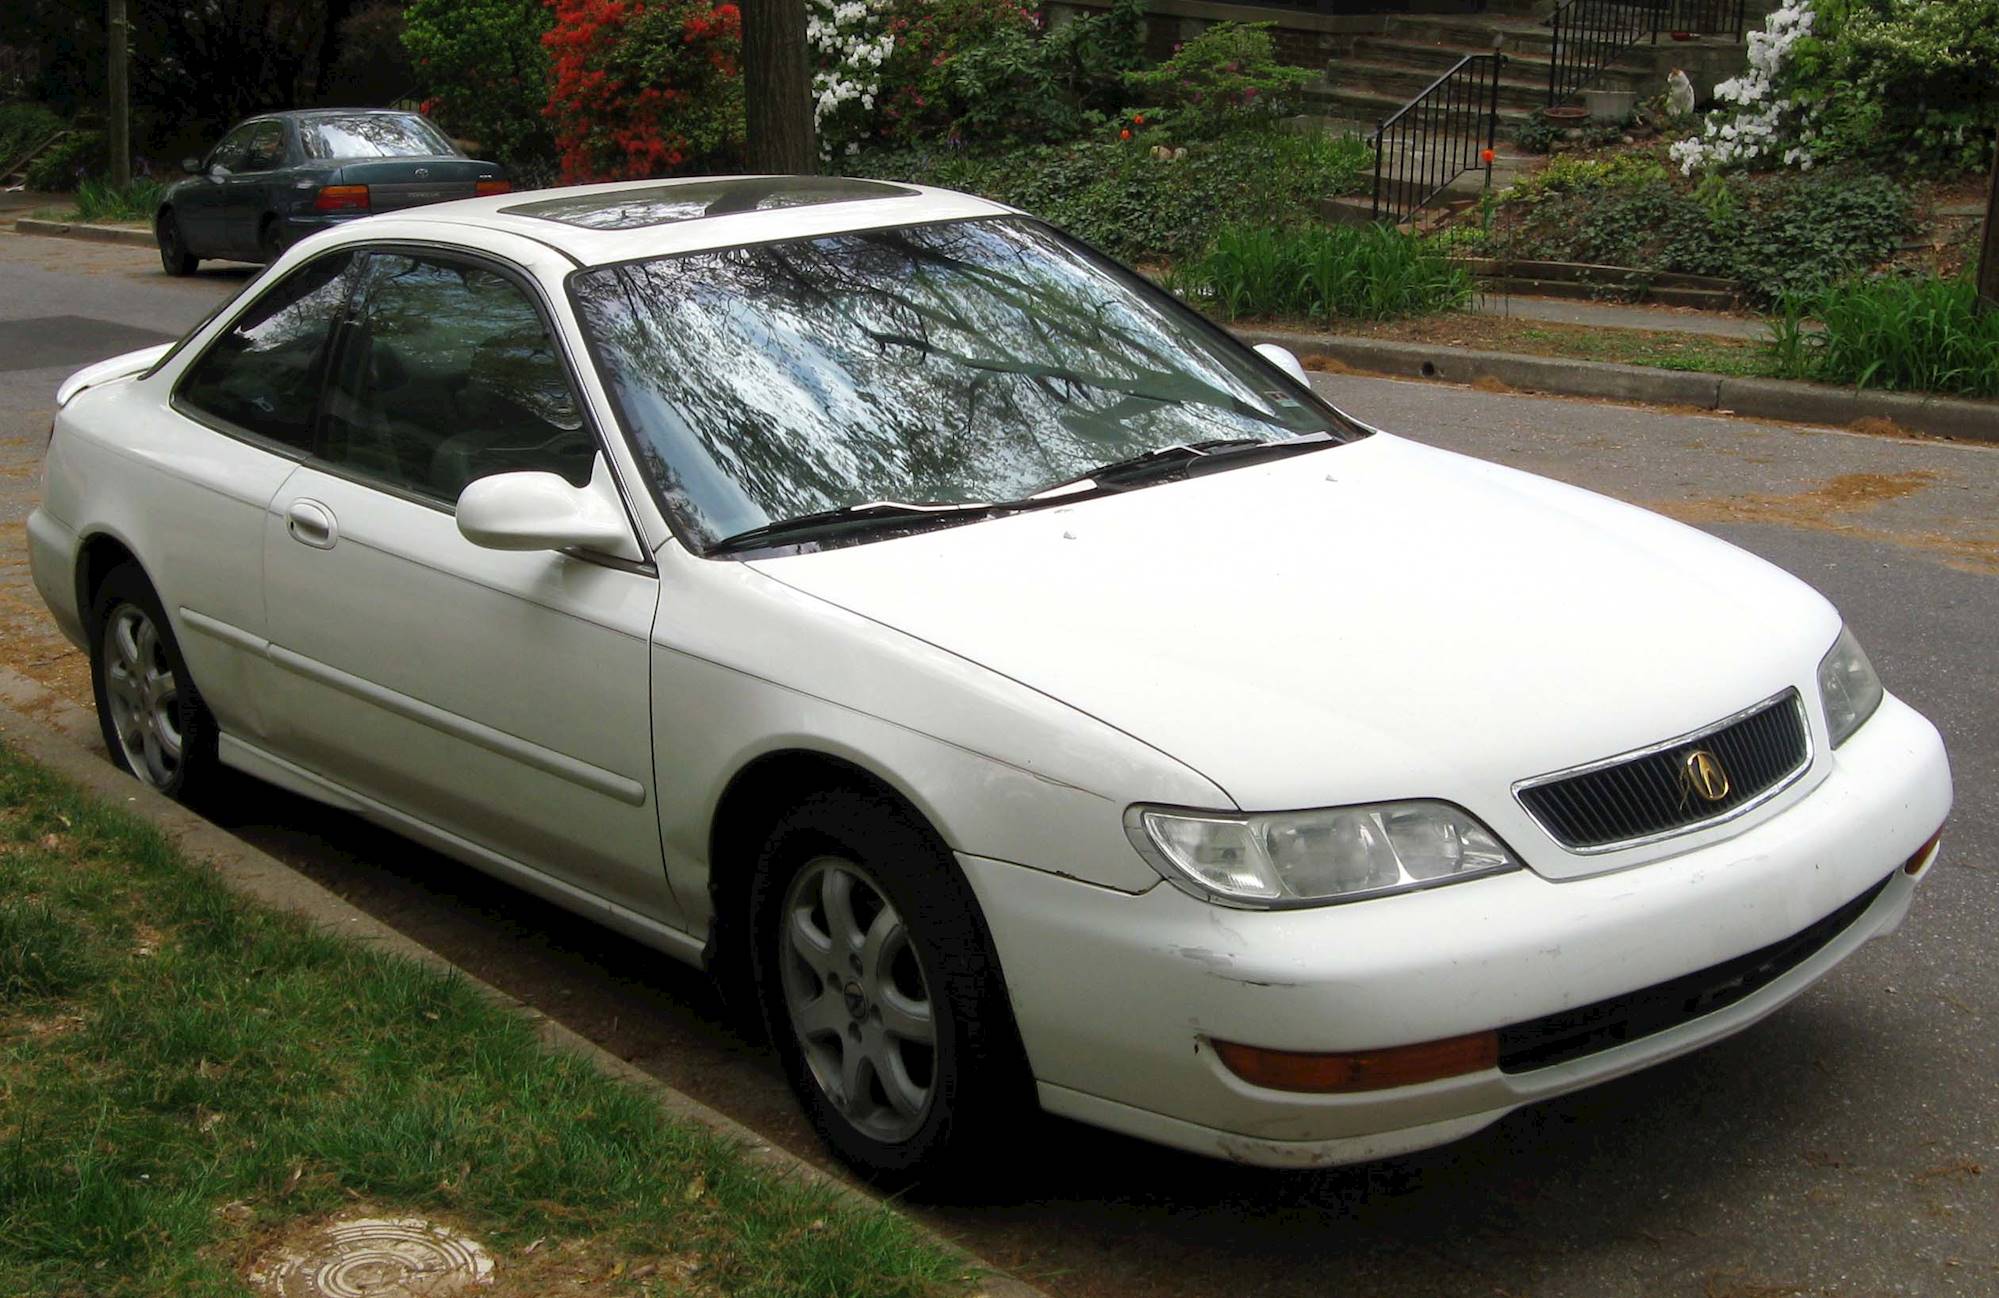 1999 Acura CL 2-Door Coupe 2.3L Automatic